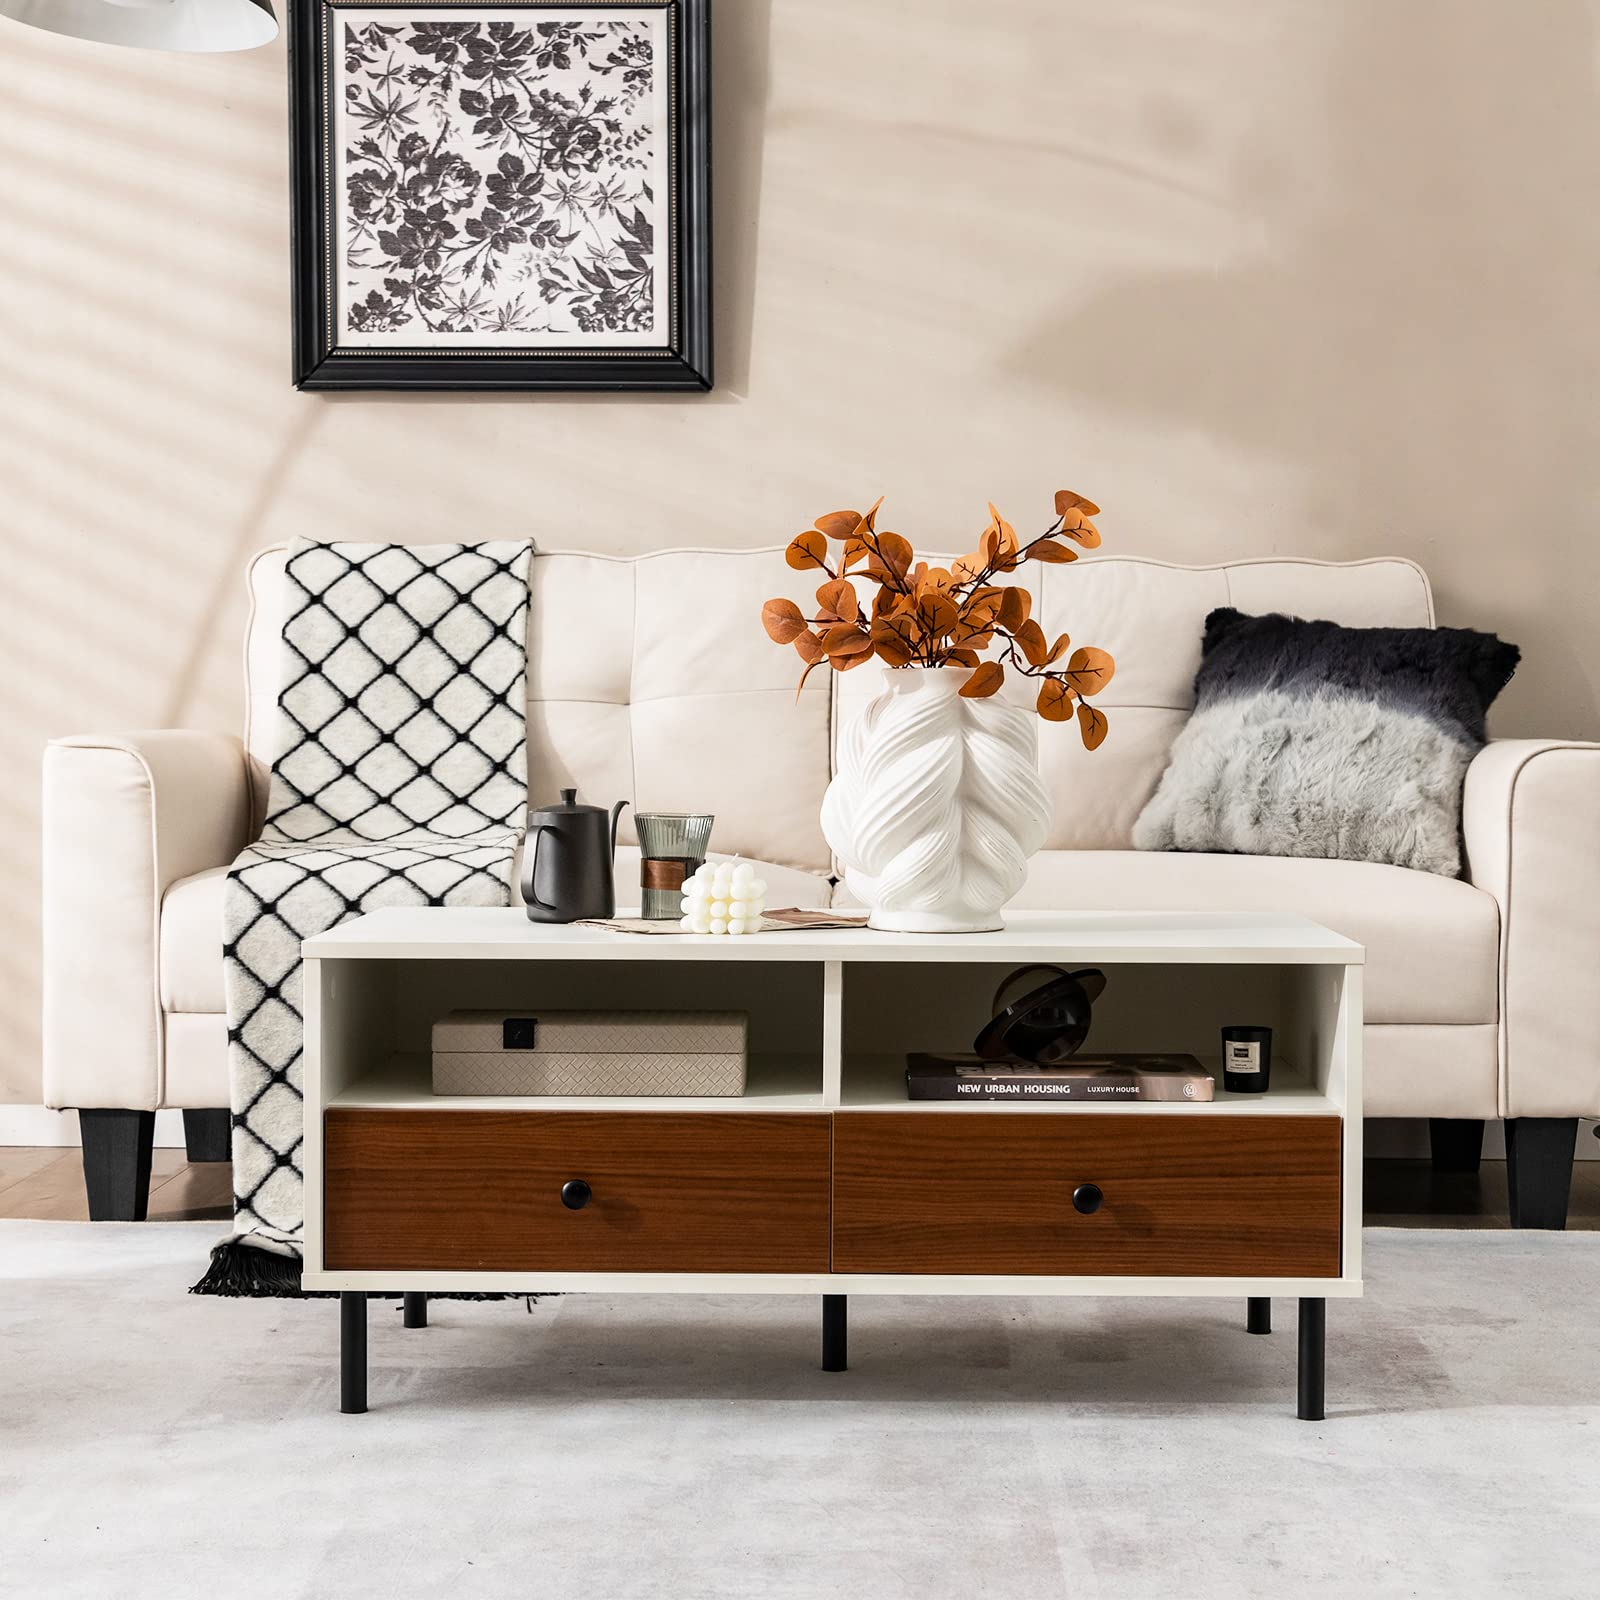 Giantex Rectangular Coffee Table with Storage, 2 Tier Wood Tea Table with 2 Drawers